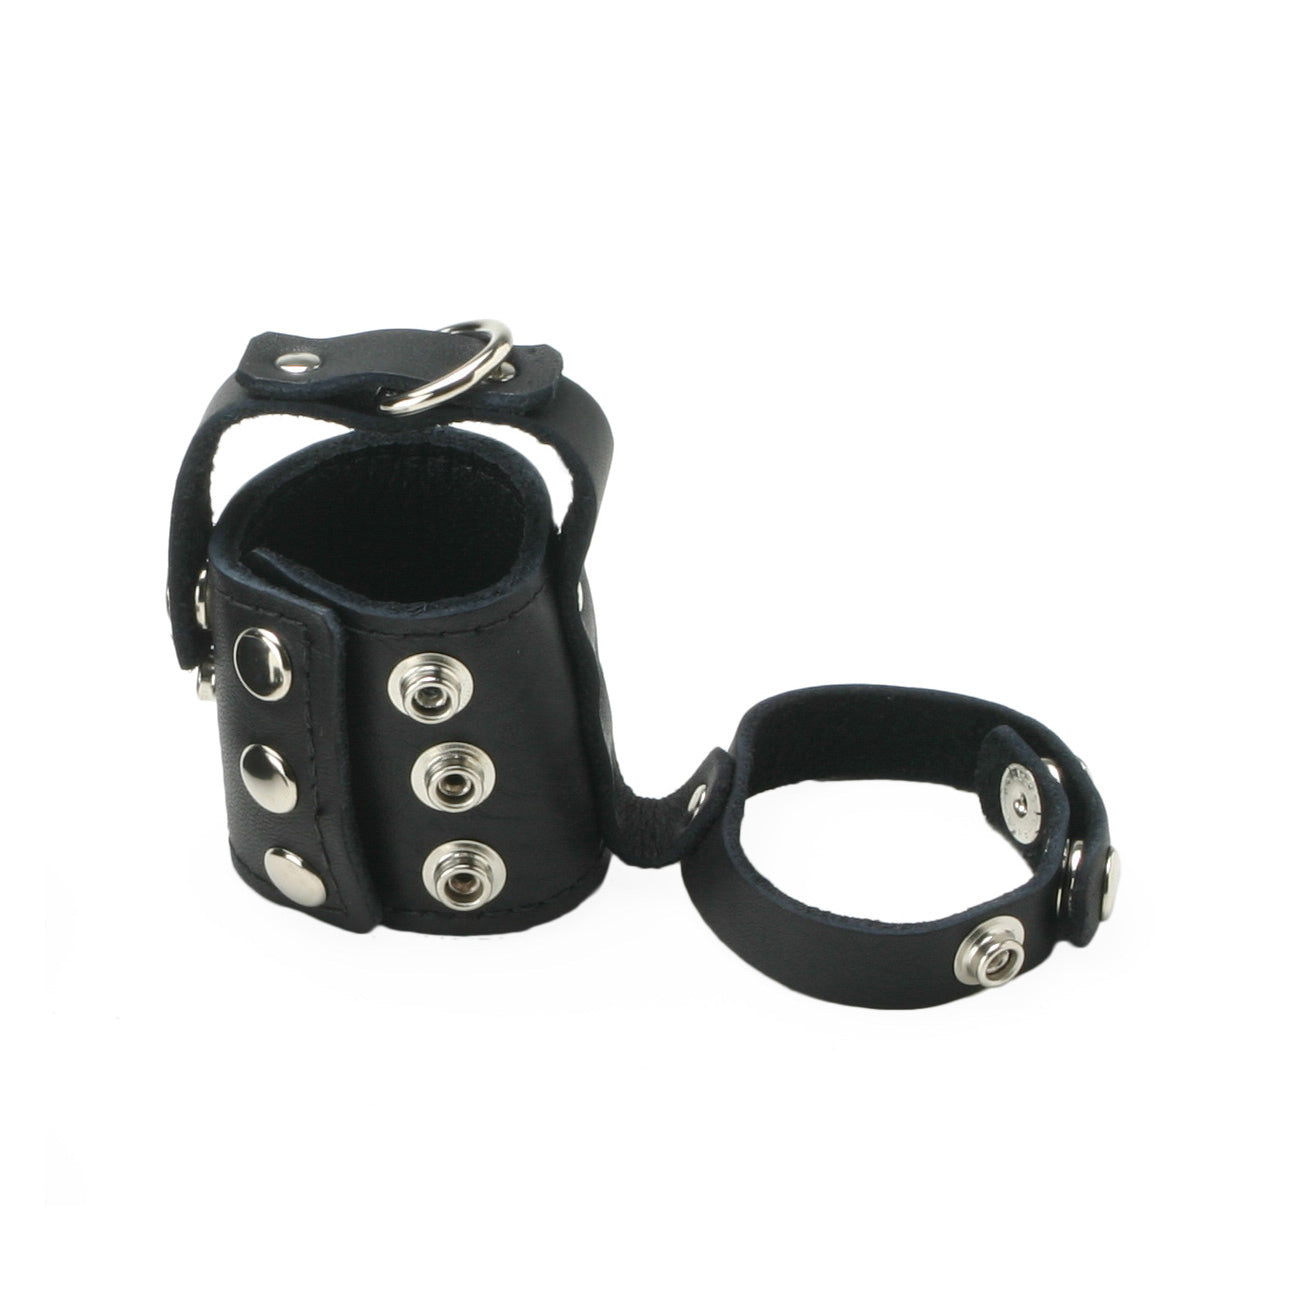 Strict Leather Cock Strap and Ball Stretcher - Large - UABDSM